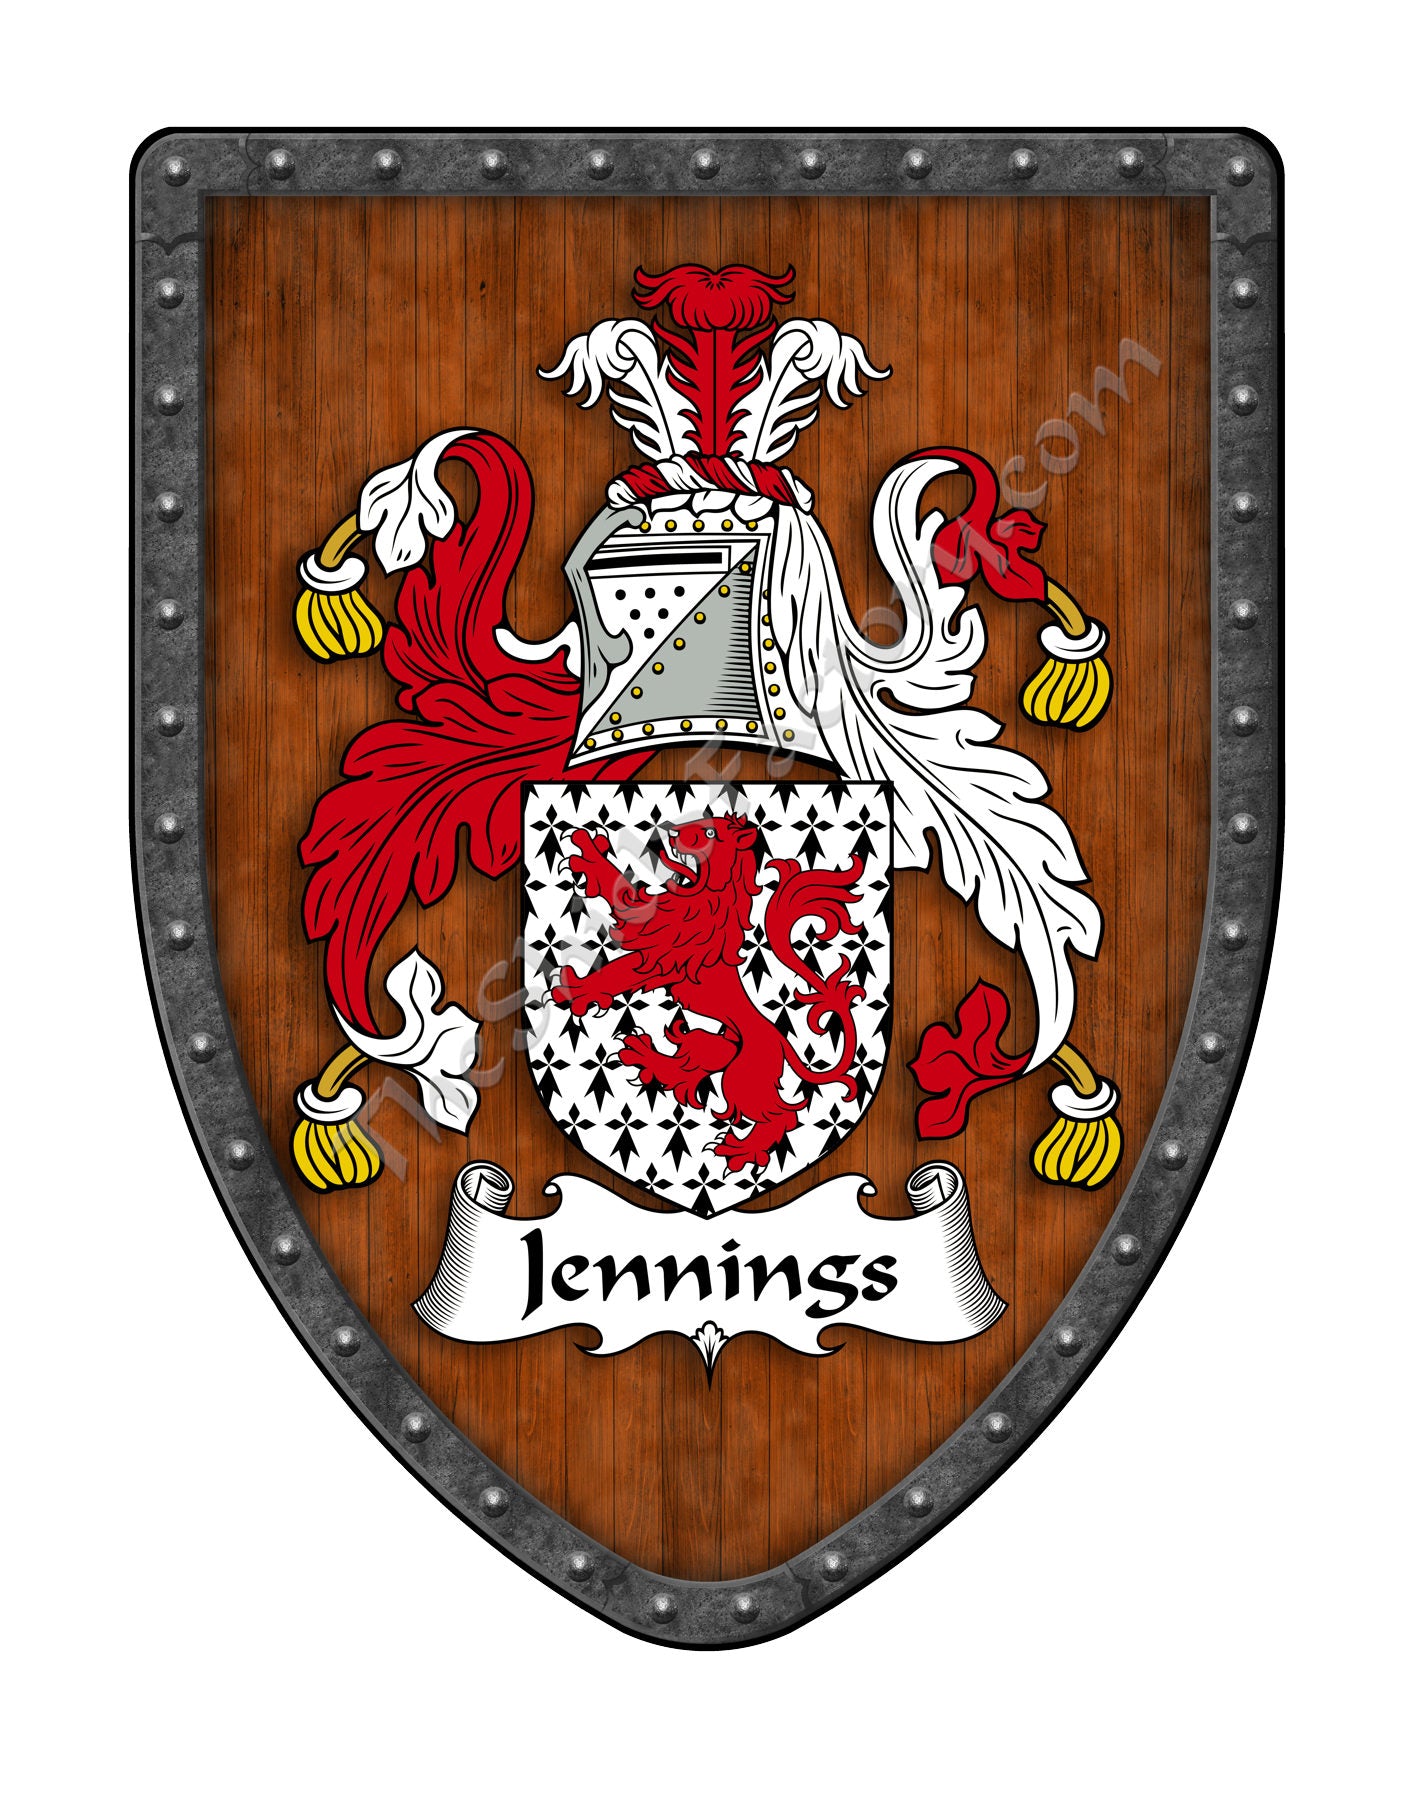 Jennings II Coat of Arms Family Crest – My Family Coat Of Arms